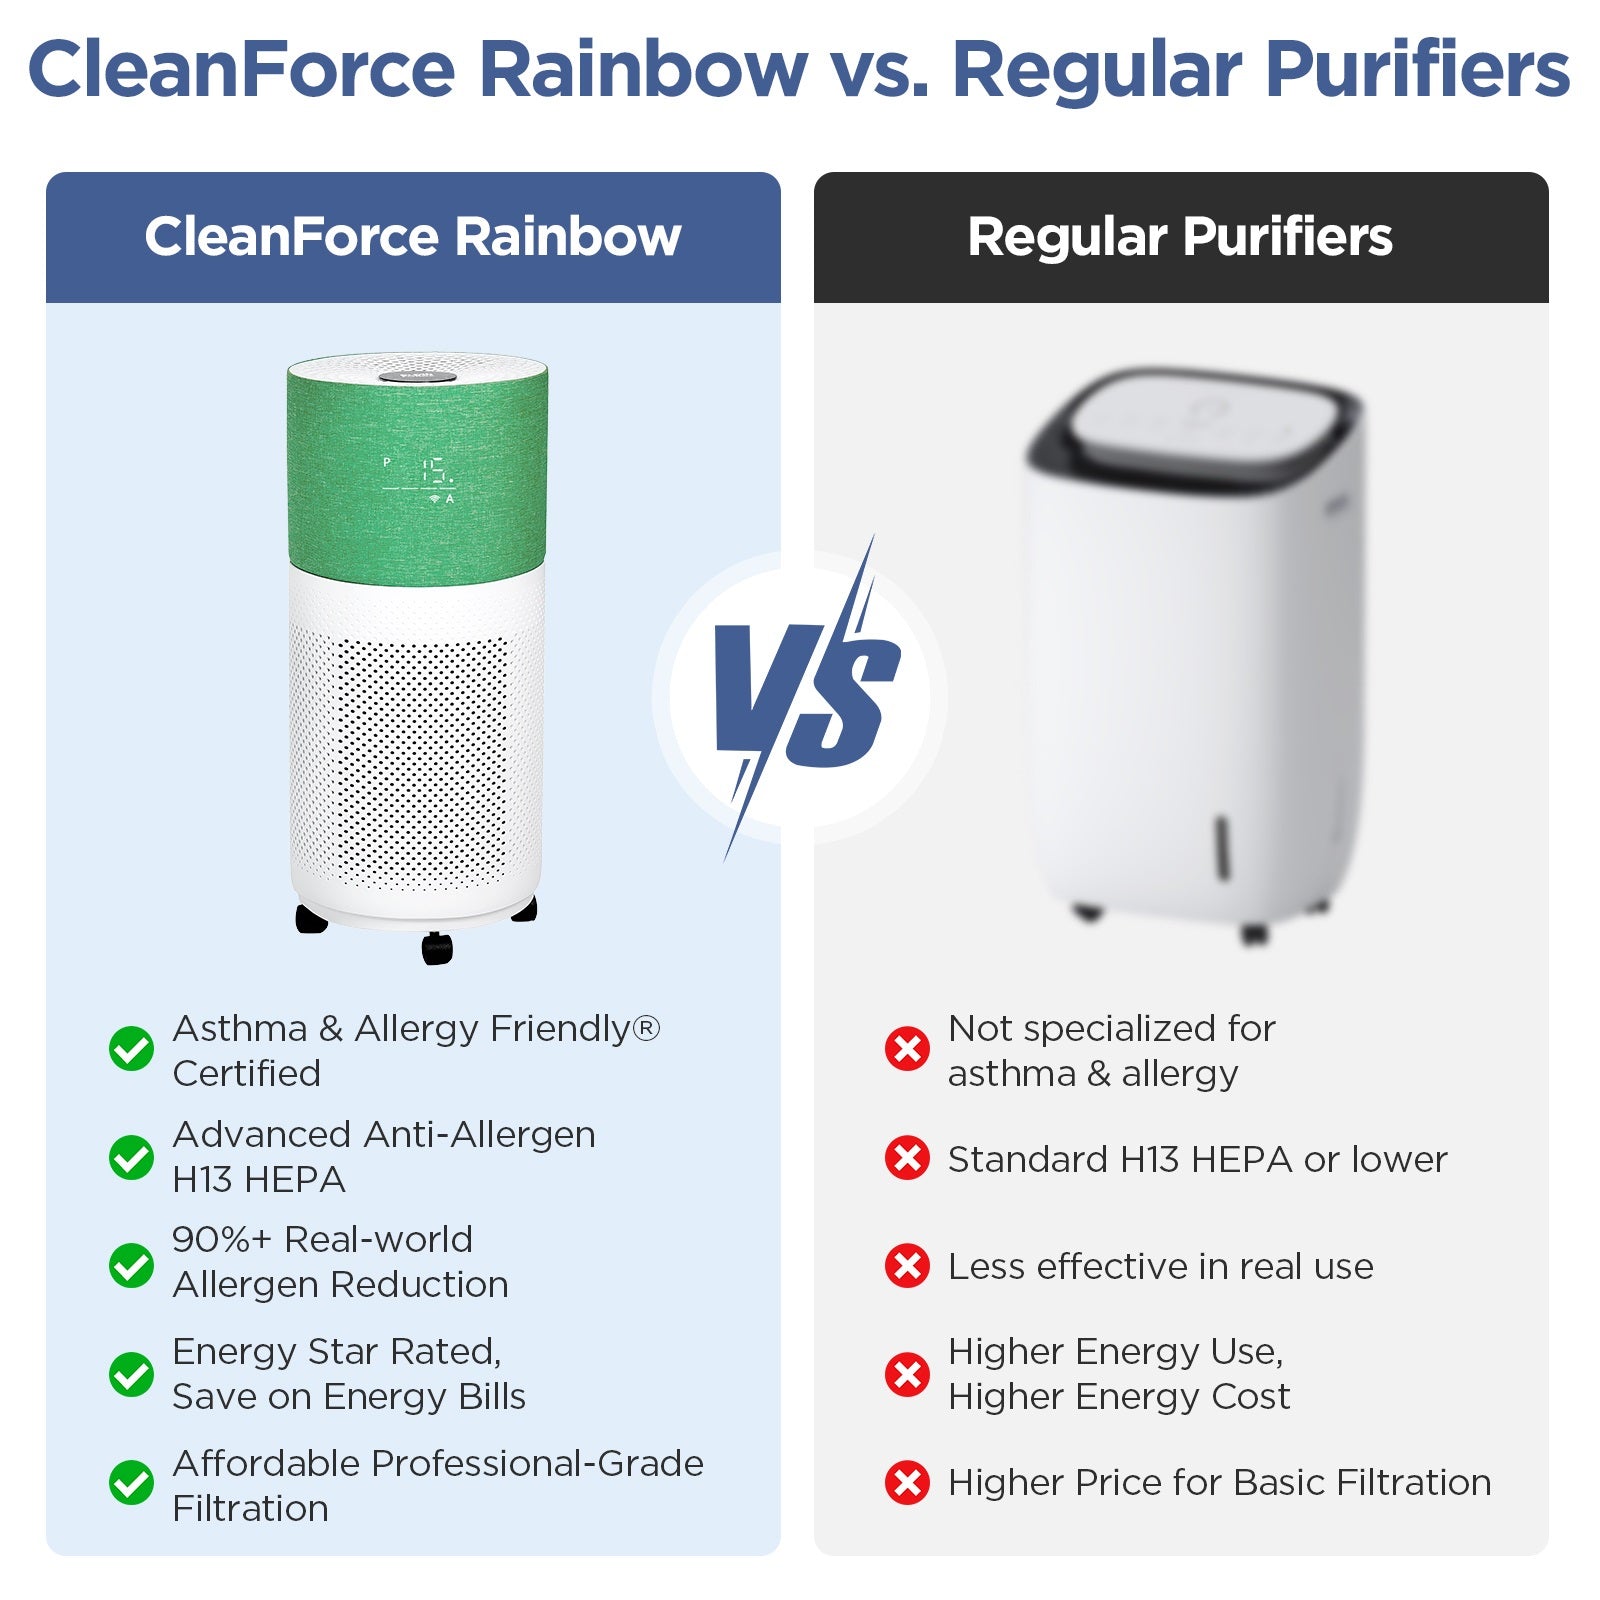 CleanForce Rainbow Air Purifier for Home Large Room - Asthma&Allergy Friendly Certified, up to 2550sqft, 99.99% Efficient Allergen, Smart Control with Monitor, Perfect for Allergy, Asthma, Pet Owners